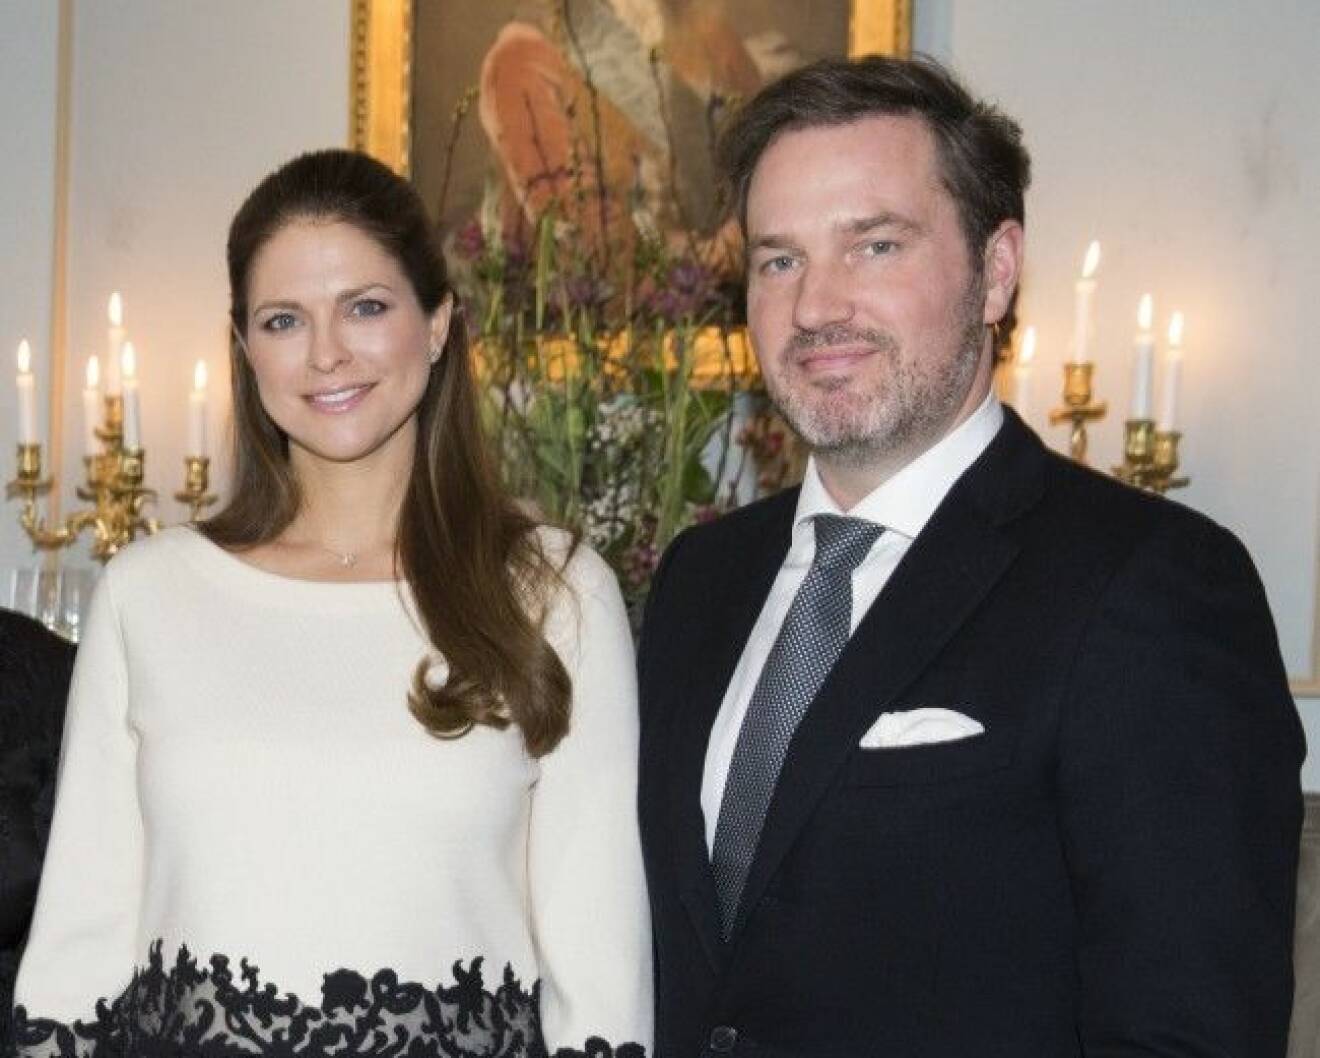 GAVLE 2015-02-02. Today Princess Madeleine of Sweden and her husband Mr. Christopher ONeill visited Gavle. The visit started with a luncheon hosted by County Governor Barbro Holmberg at Gavle Palace. Among the guests were Olle and Ewa Westling (parents of Prince Daniel). COPYRIGHT STELLA PICTURES